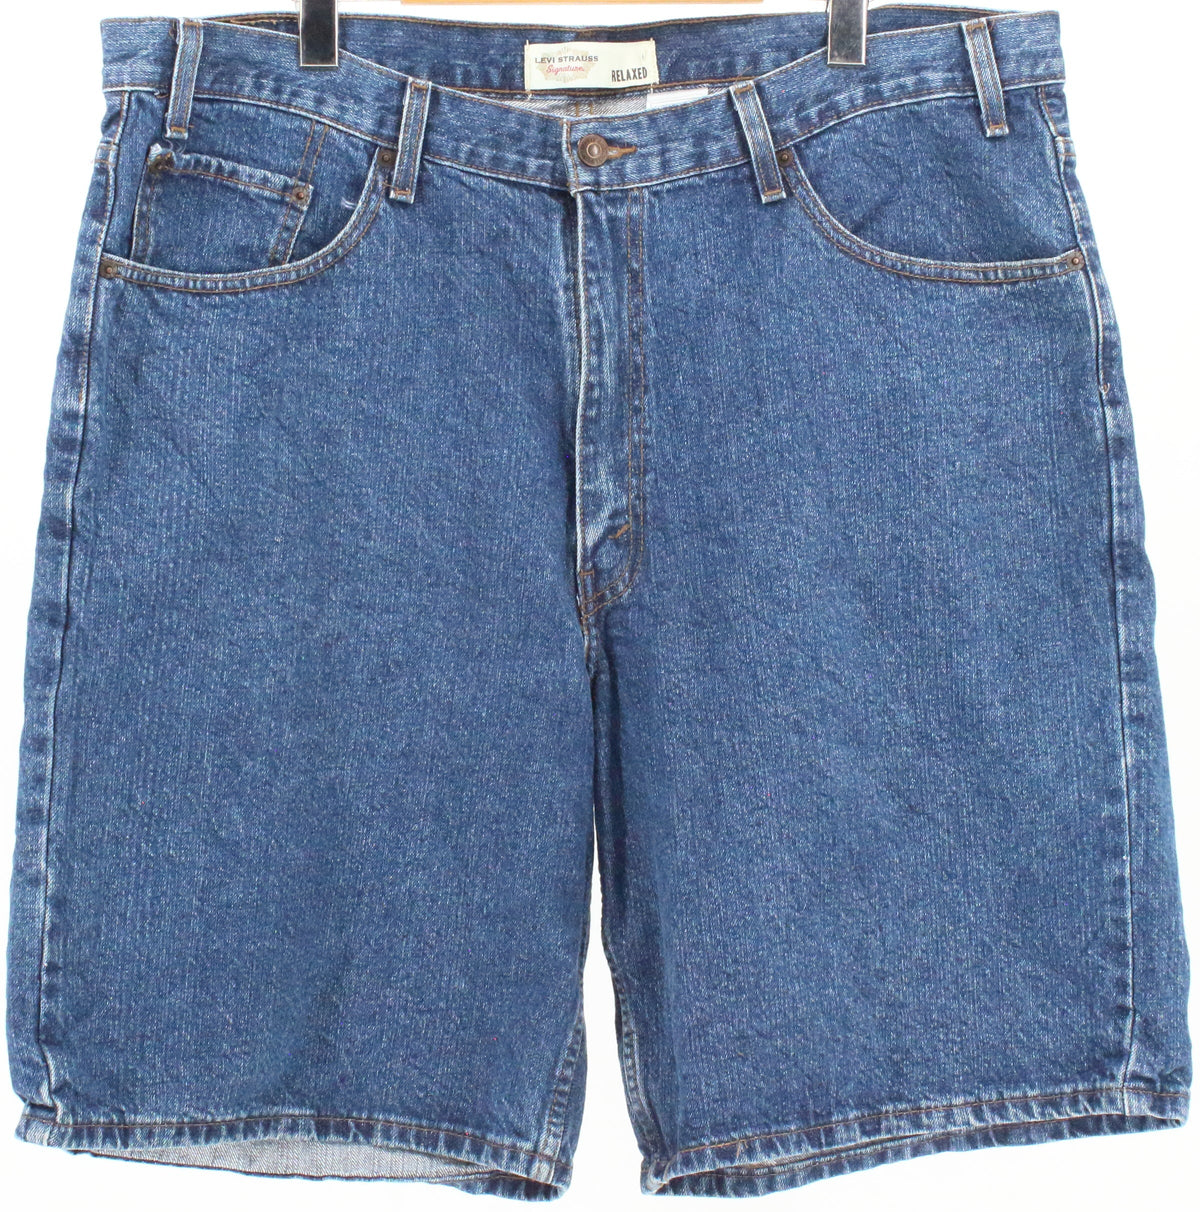 Levis Dark Blue Wash Levi Strauss Signature Relaxed Shorts